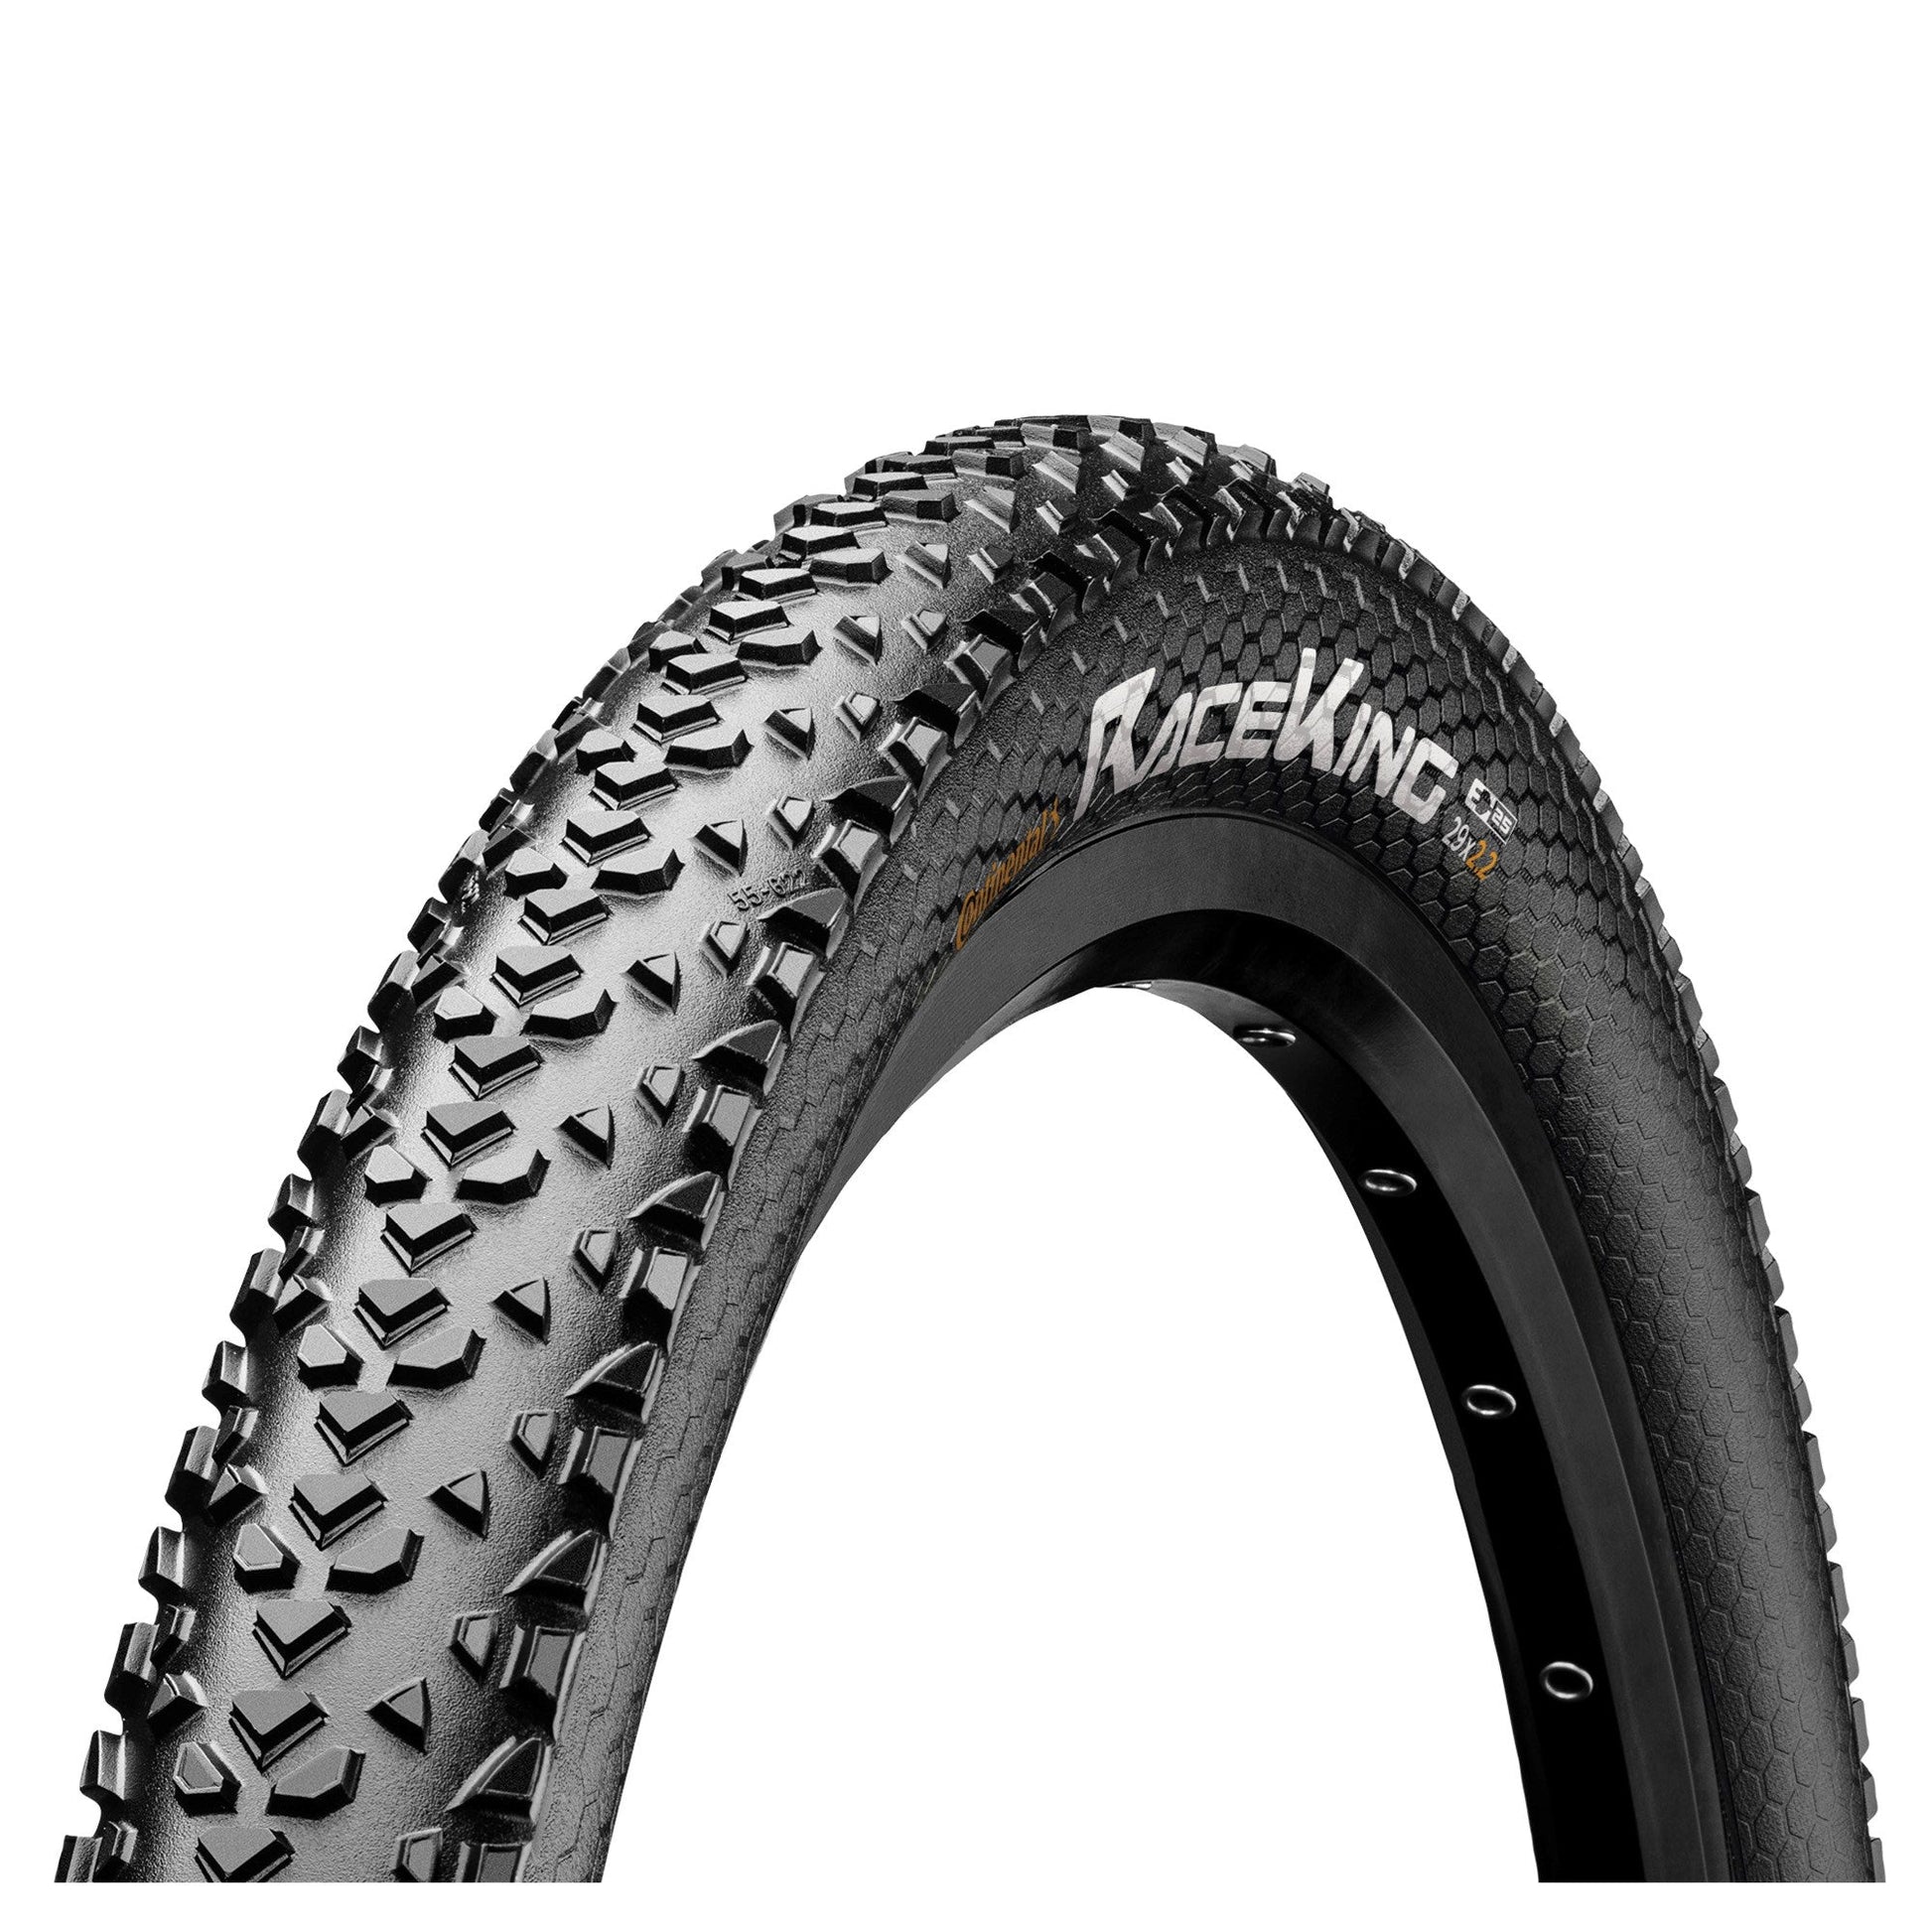 CONTINENTAL RACE KING 27.5" WIRED MTB TYRE